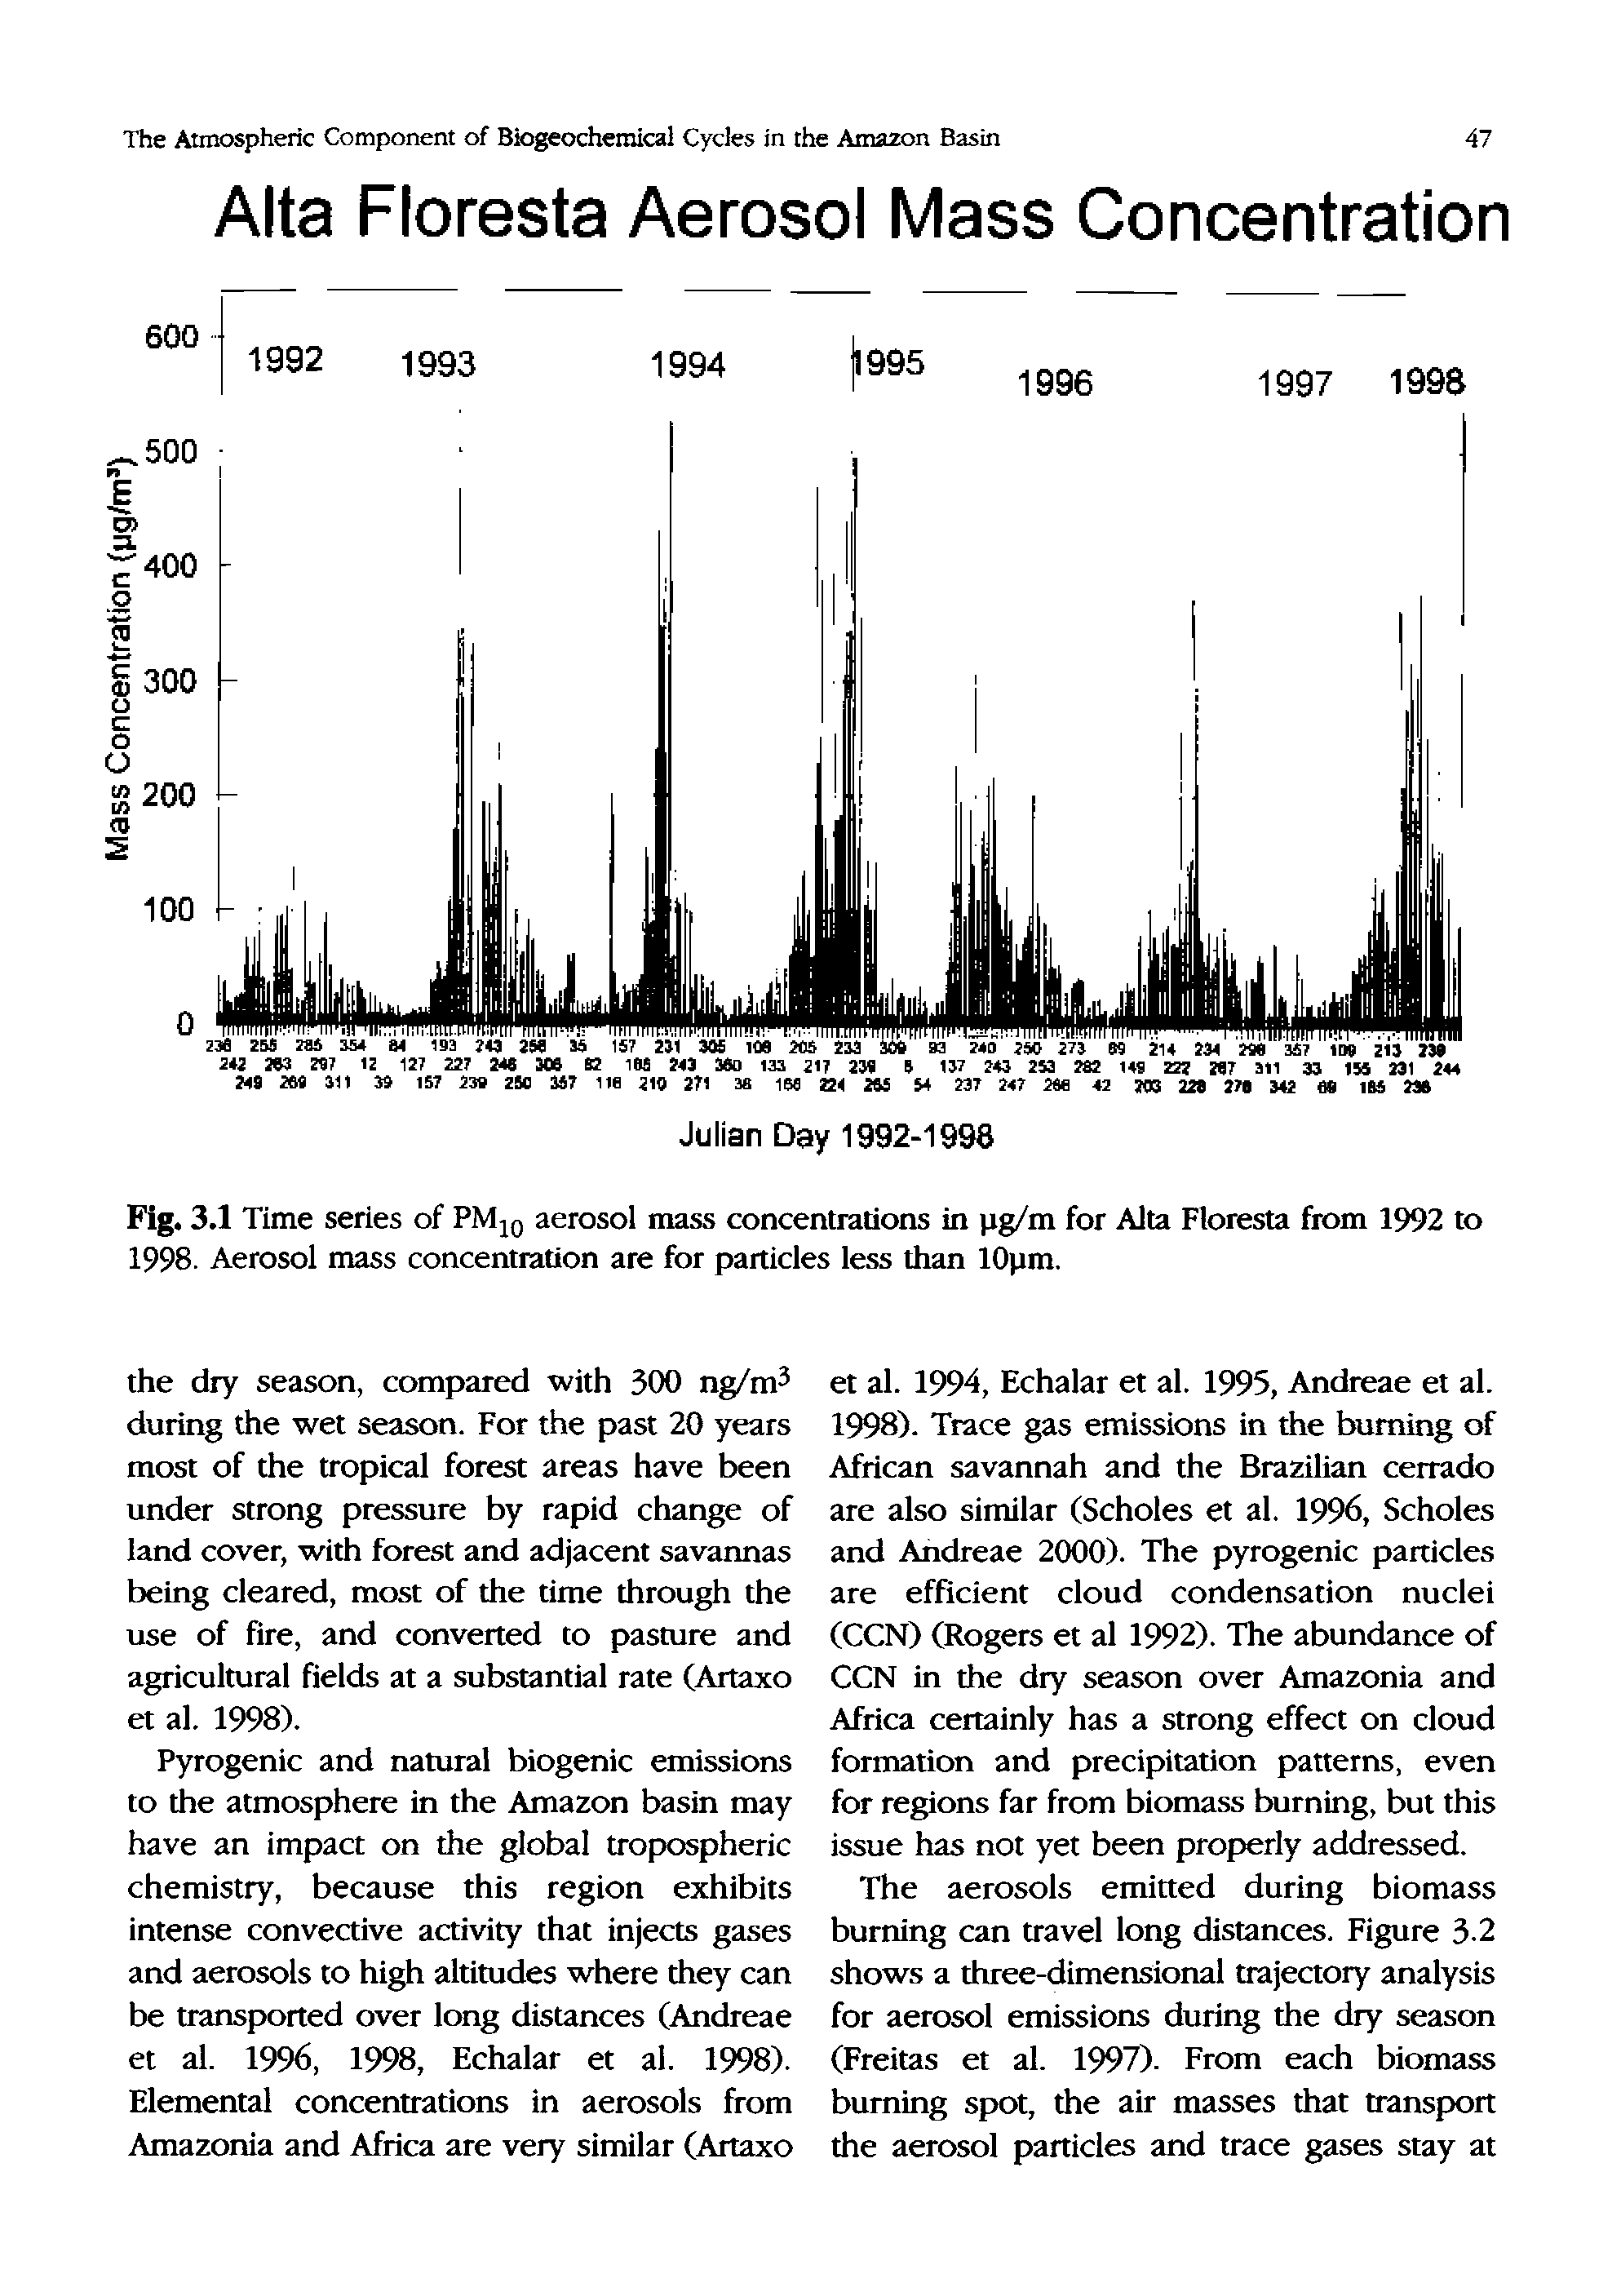 Fig. 3.1 Time series of PMjq aerosol mass concentrations in jig/m for Alta Floresta from 1992 to 1998. Aerosol mass concentration are for particles less than 10pm.